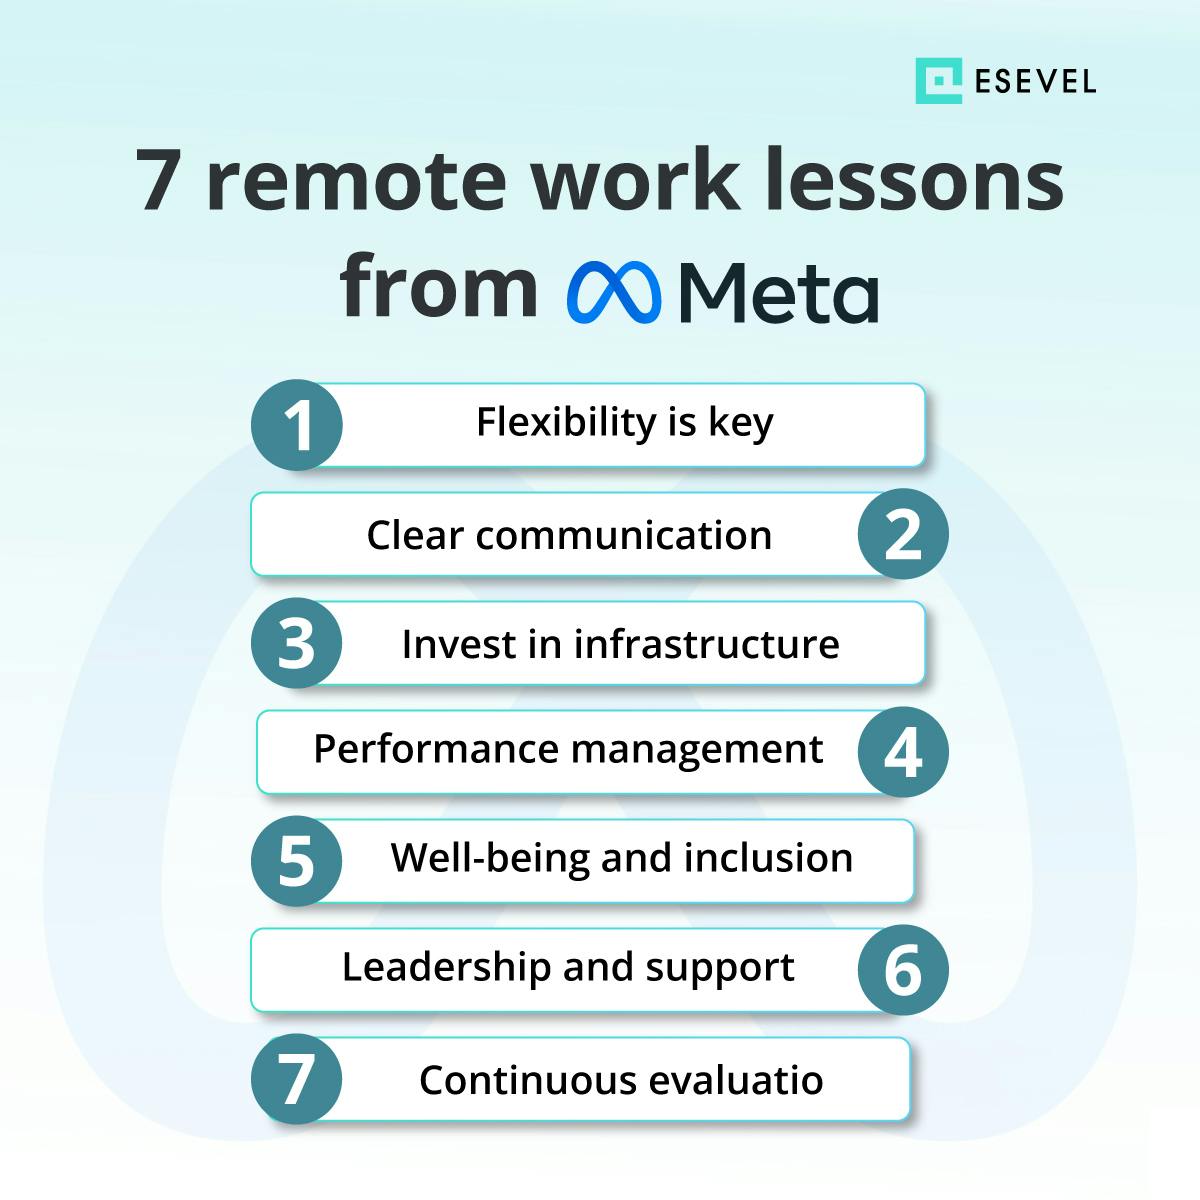 Esevel - Meta work remote policy